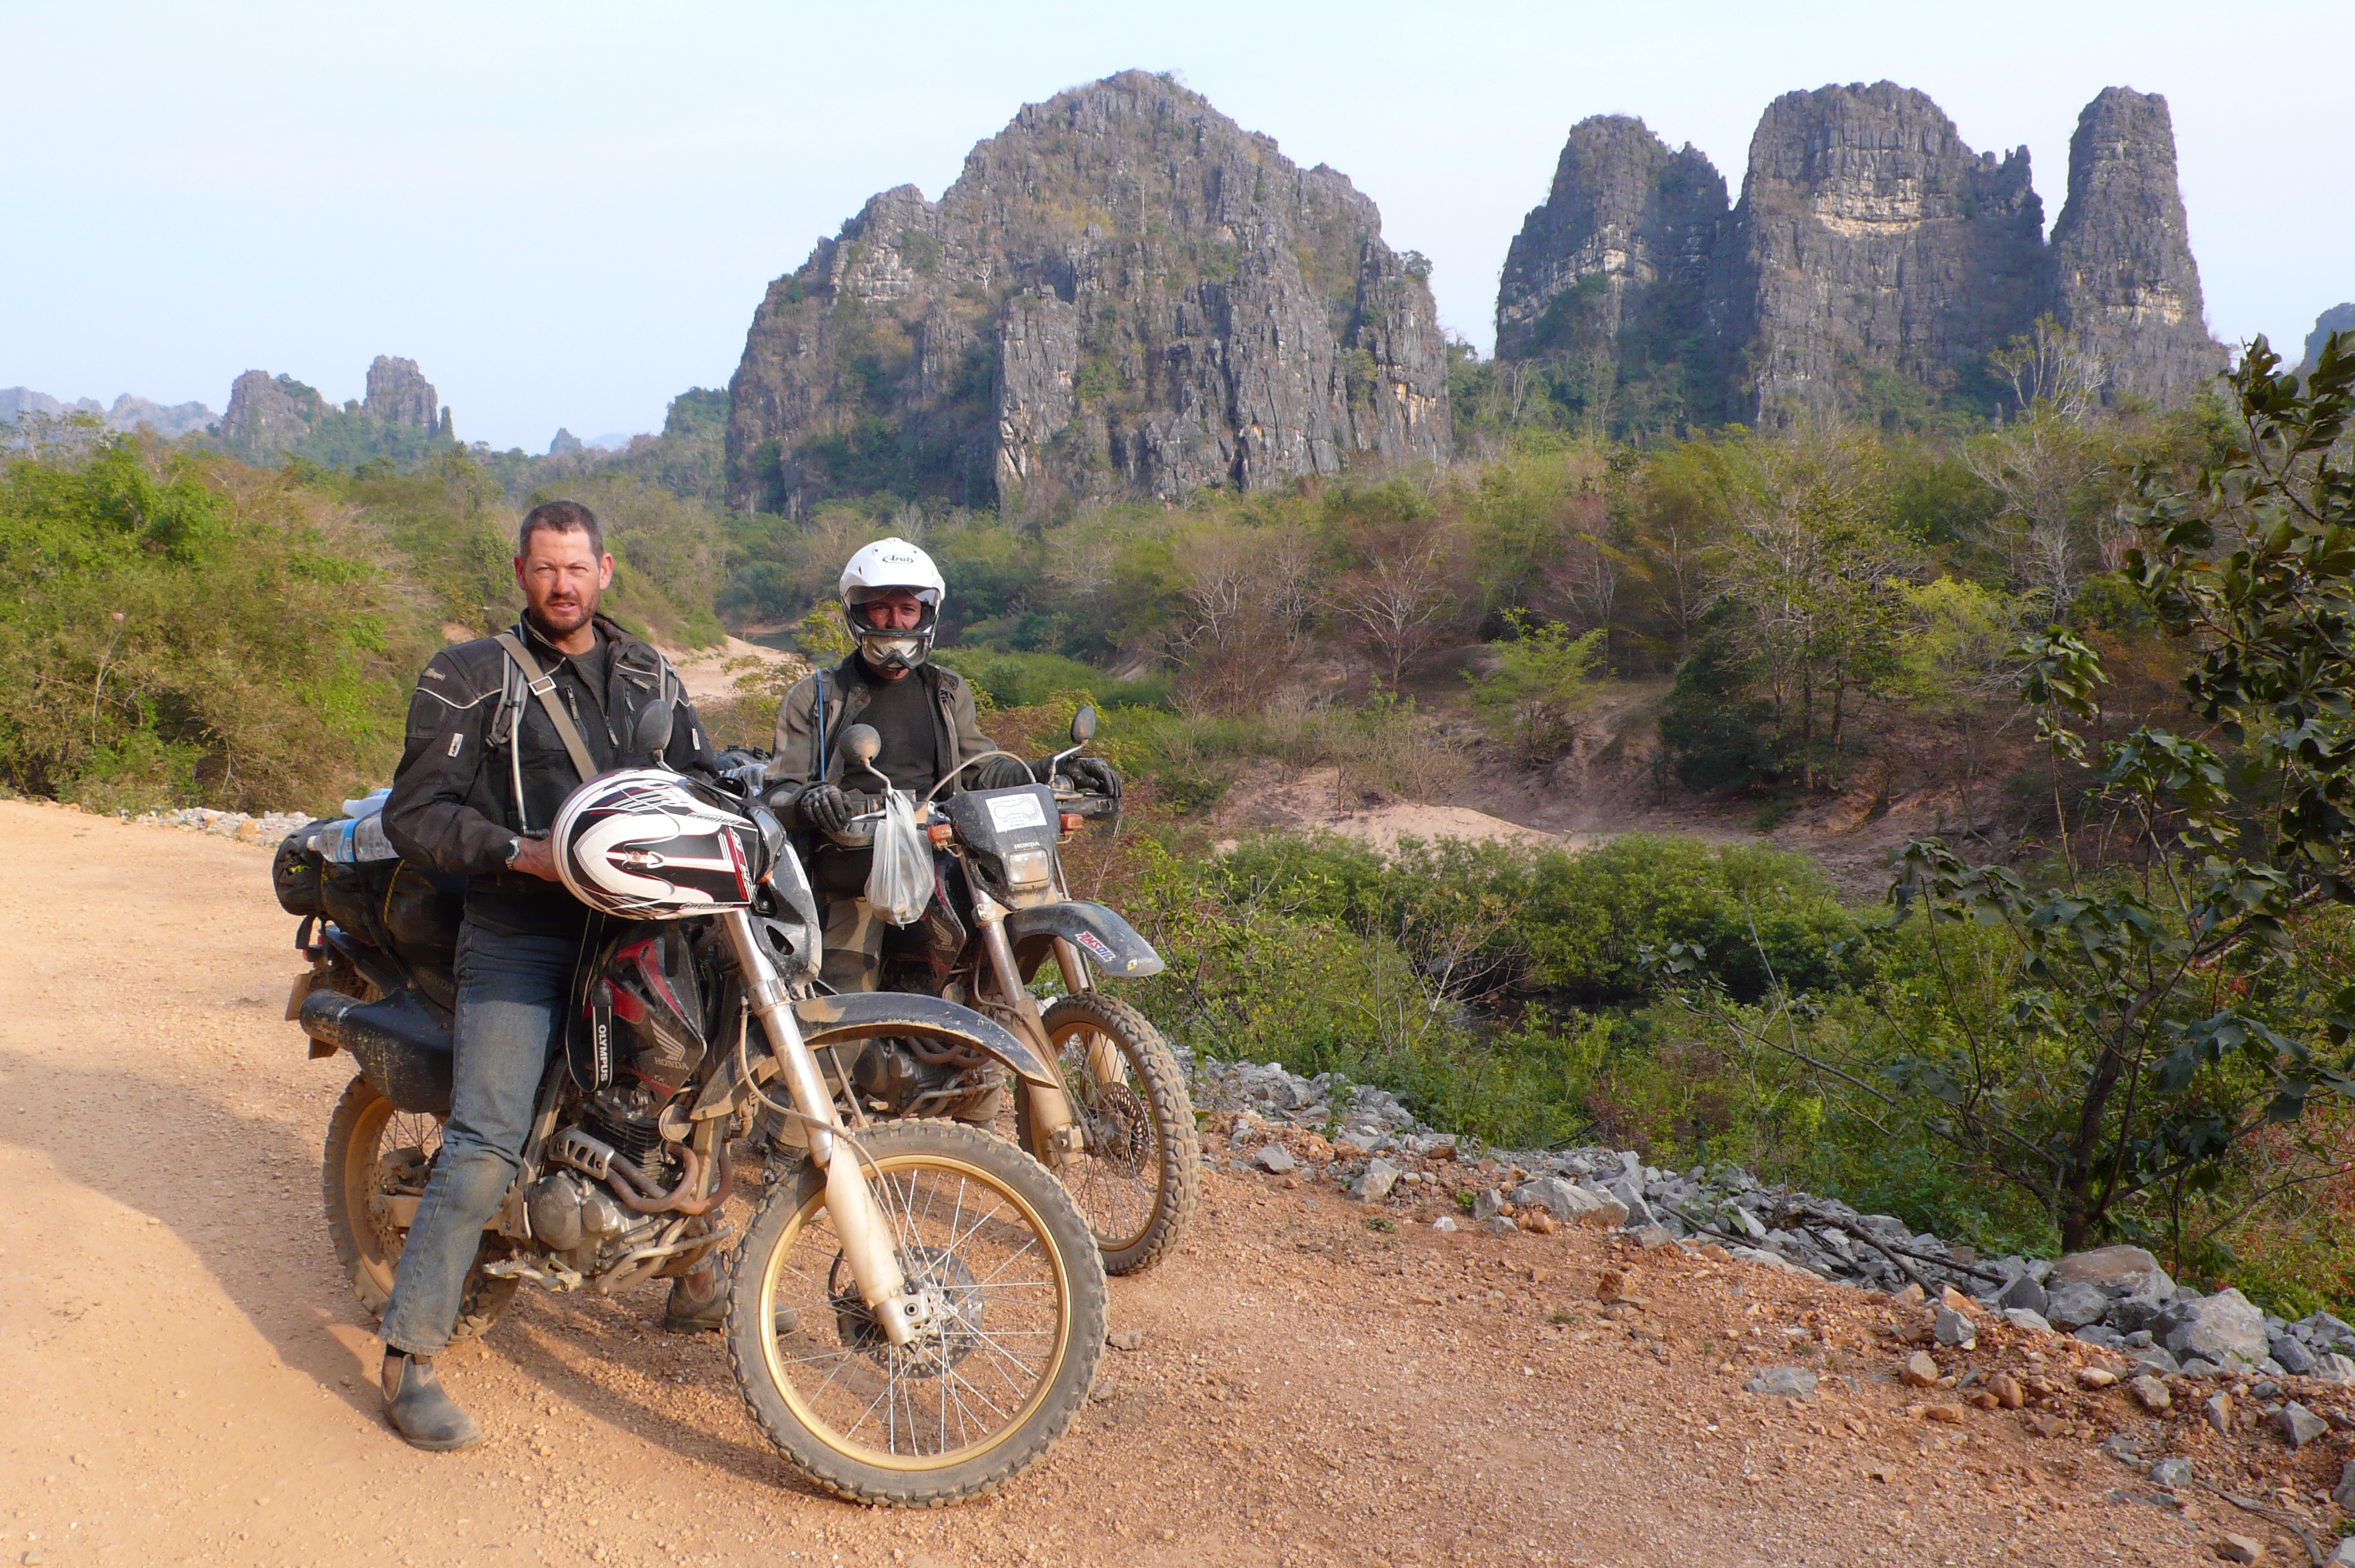 Explore Indochina riders stopped by some karst